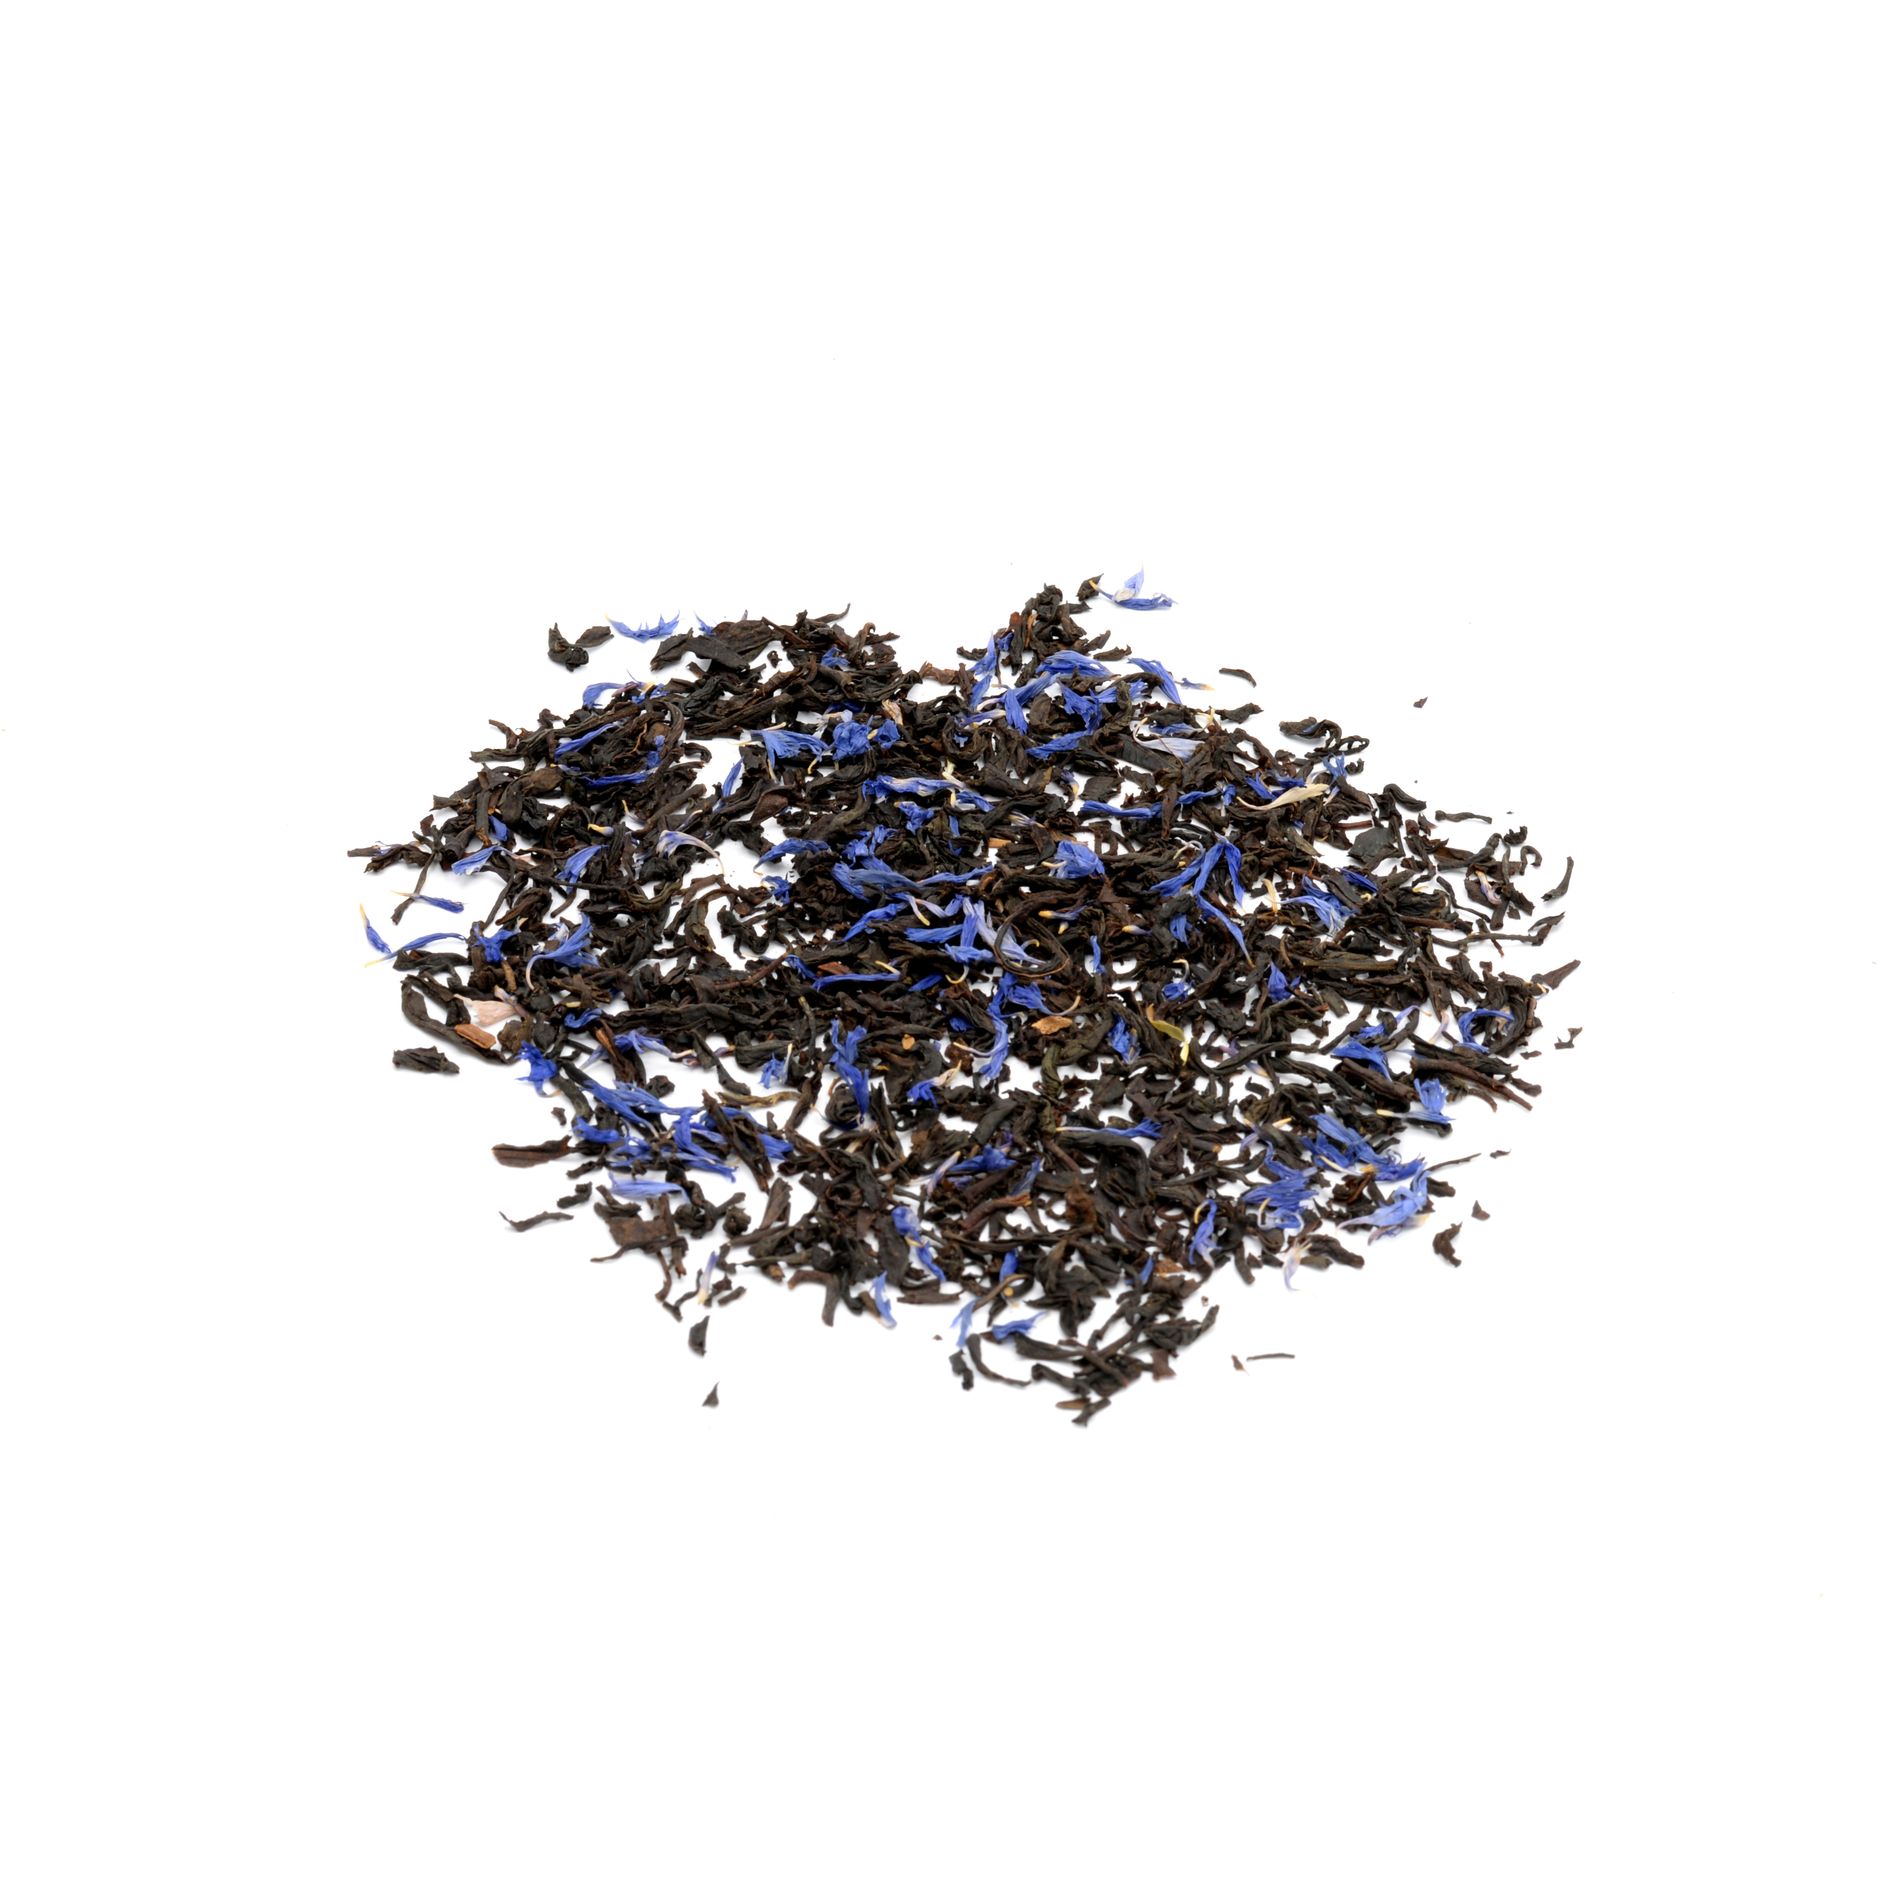 mariage freres earl grey french blue